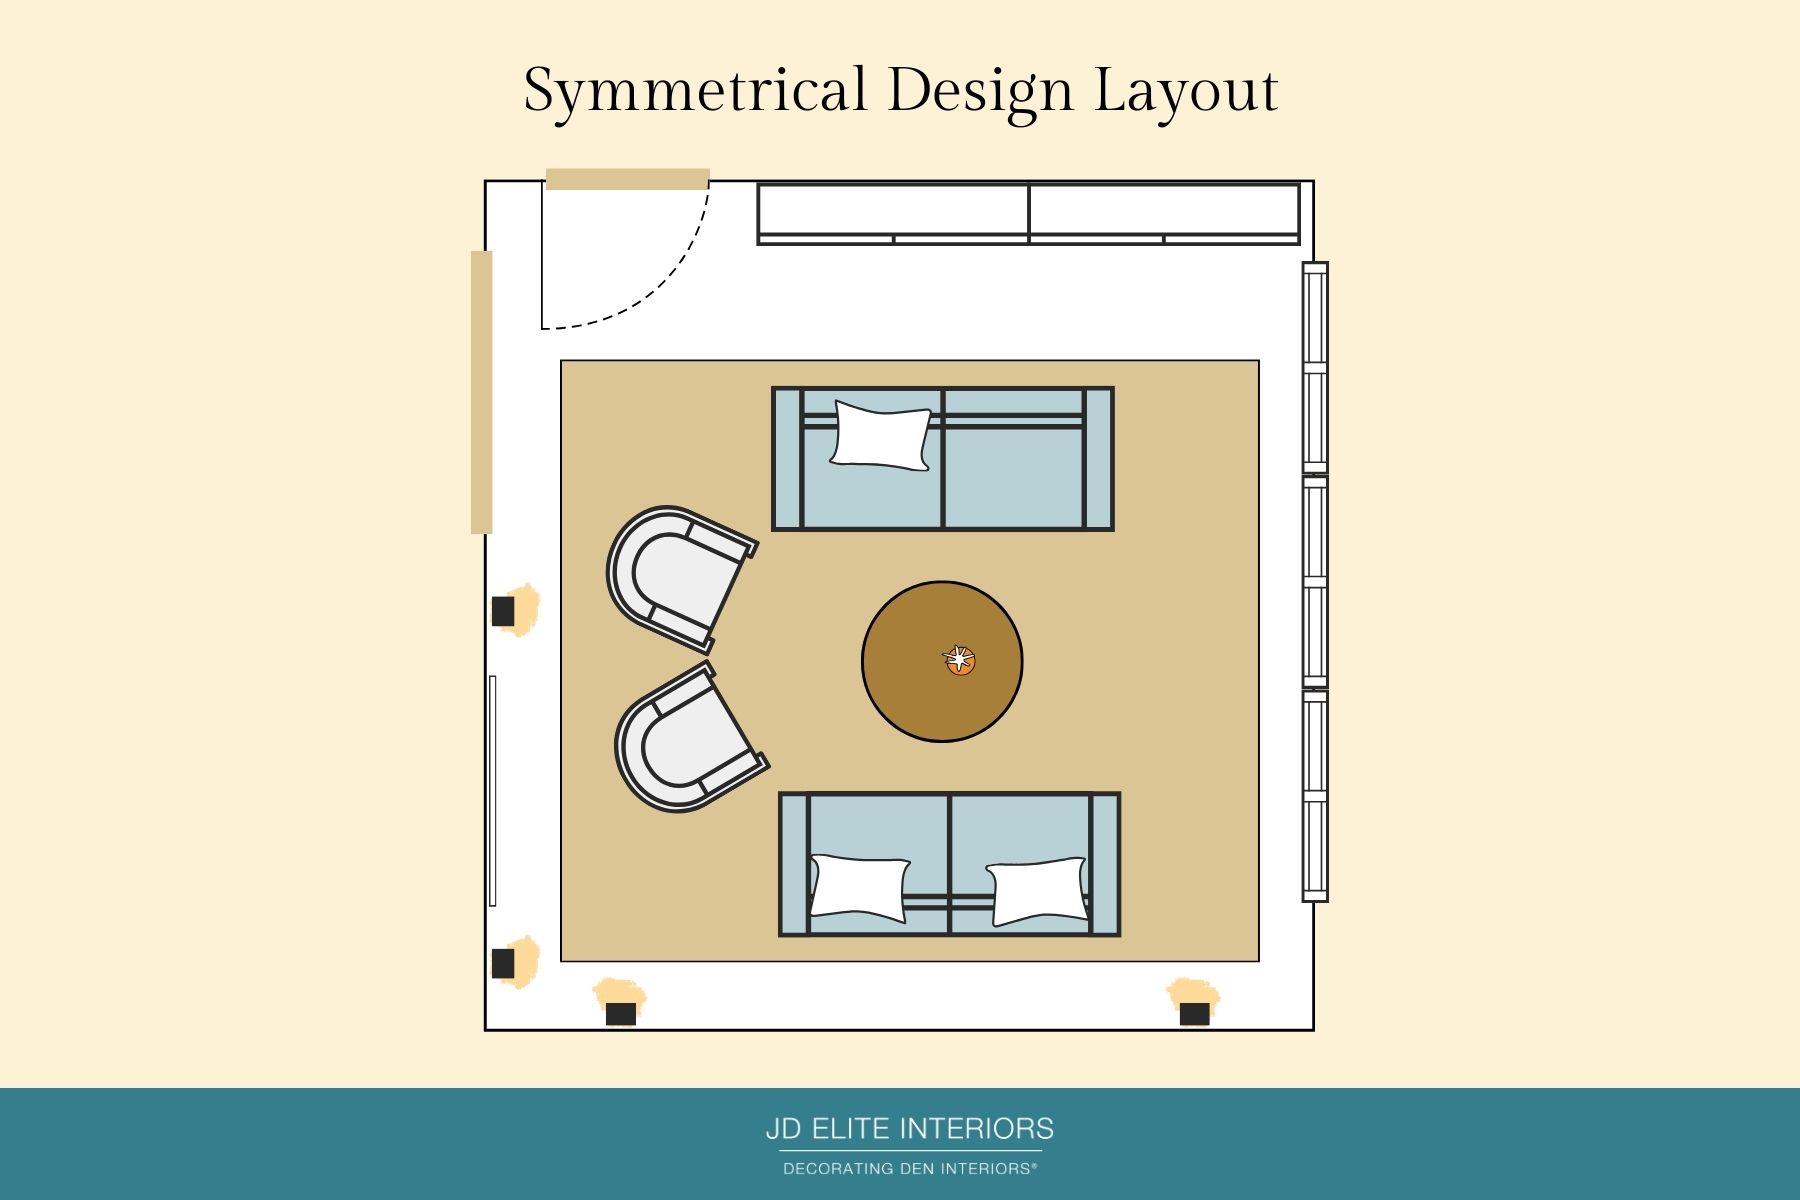 Symmetrical design layout for a living room with couches and chairs